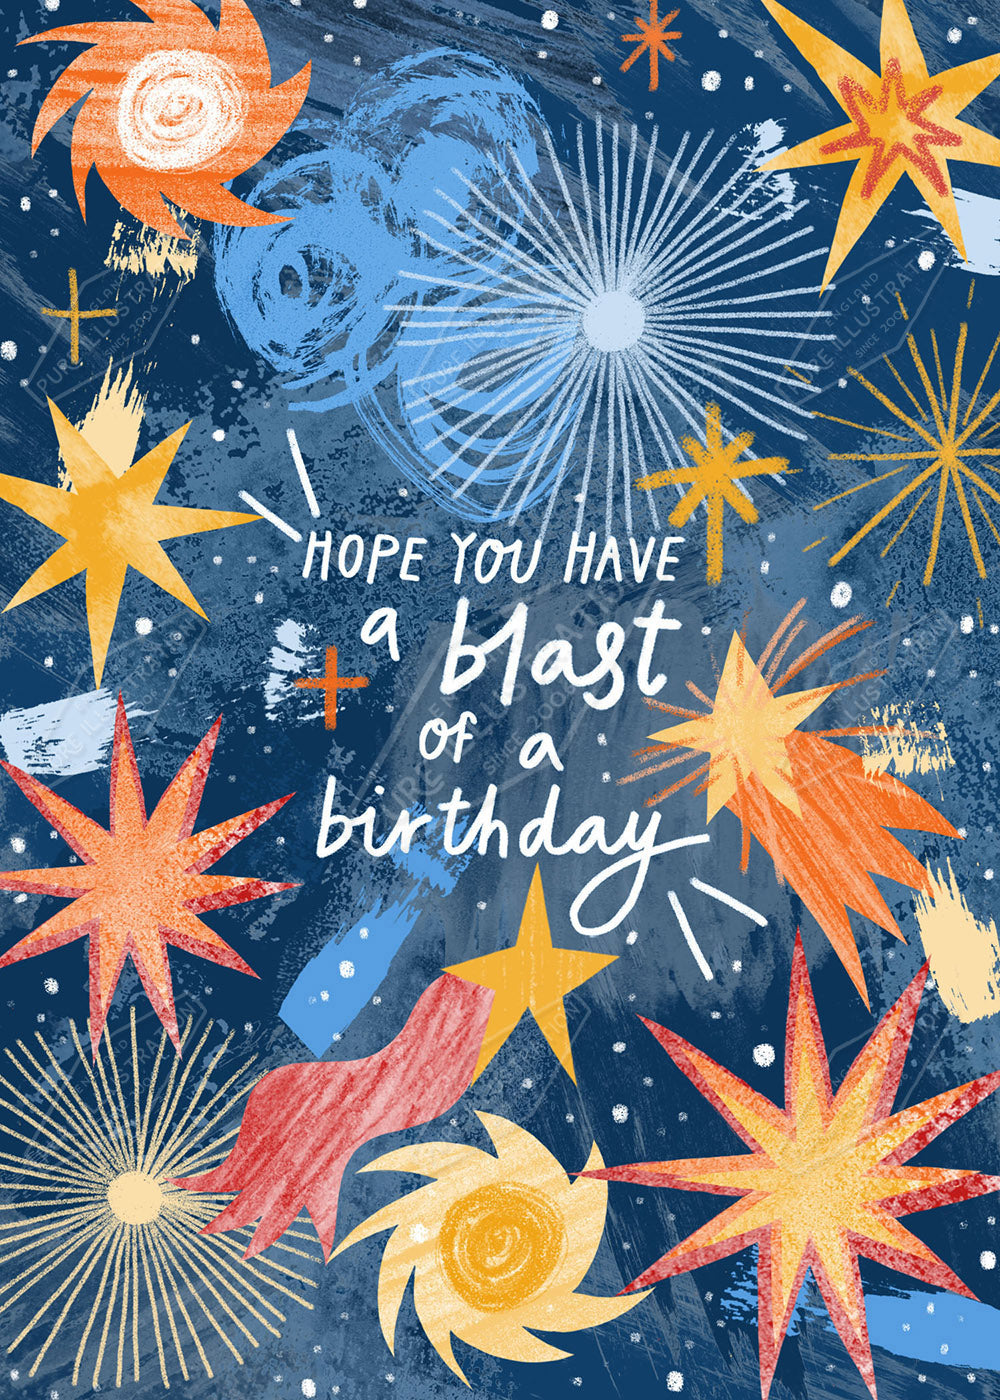 Cosmic Birthday Wishes Greeting Card Design by Leah Brideaux for Pure Art Licensing Agency & Surface Design Studio